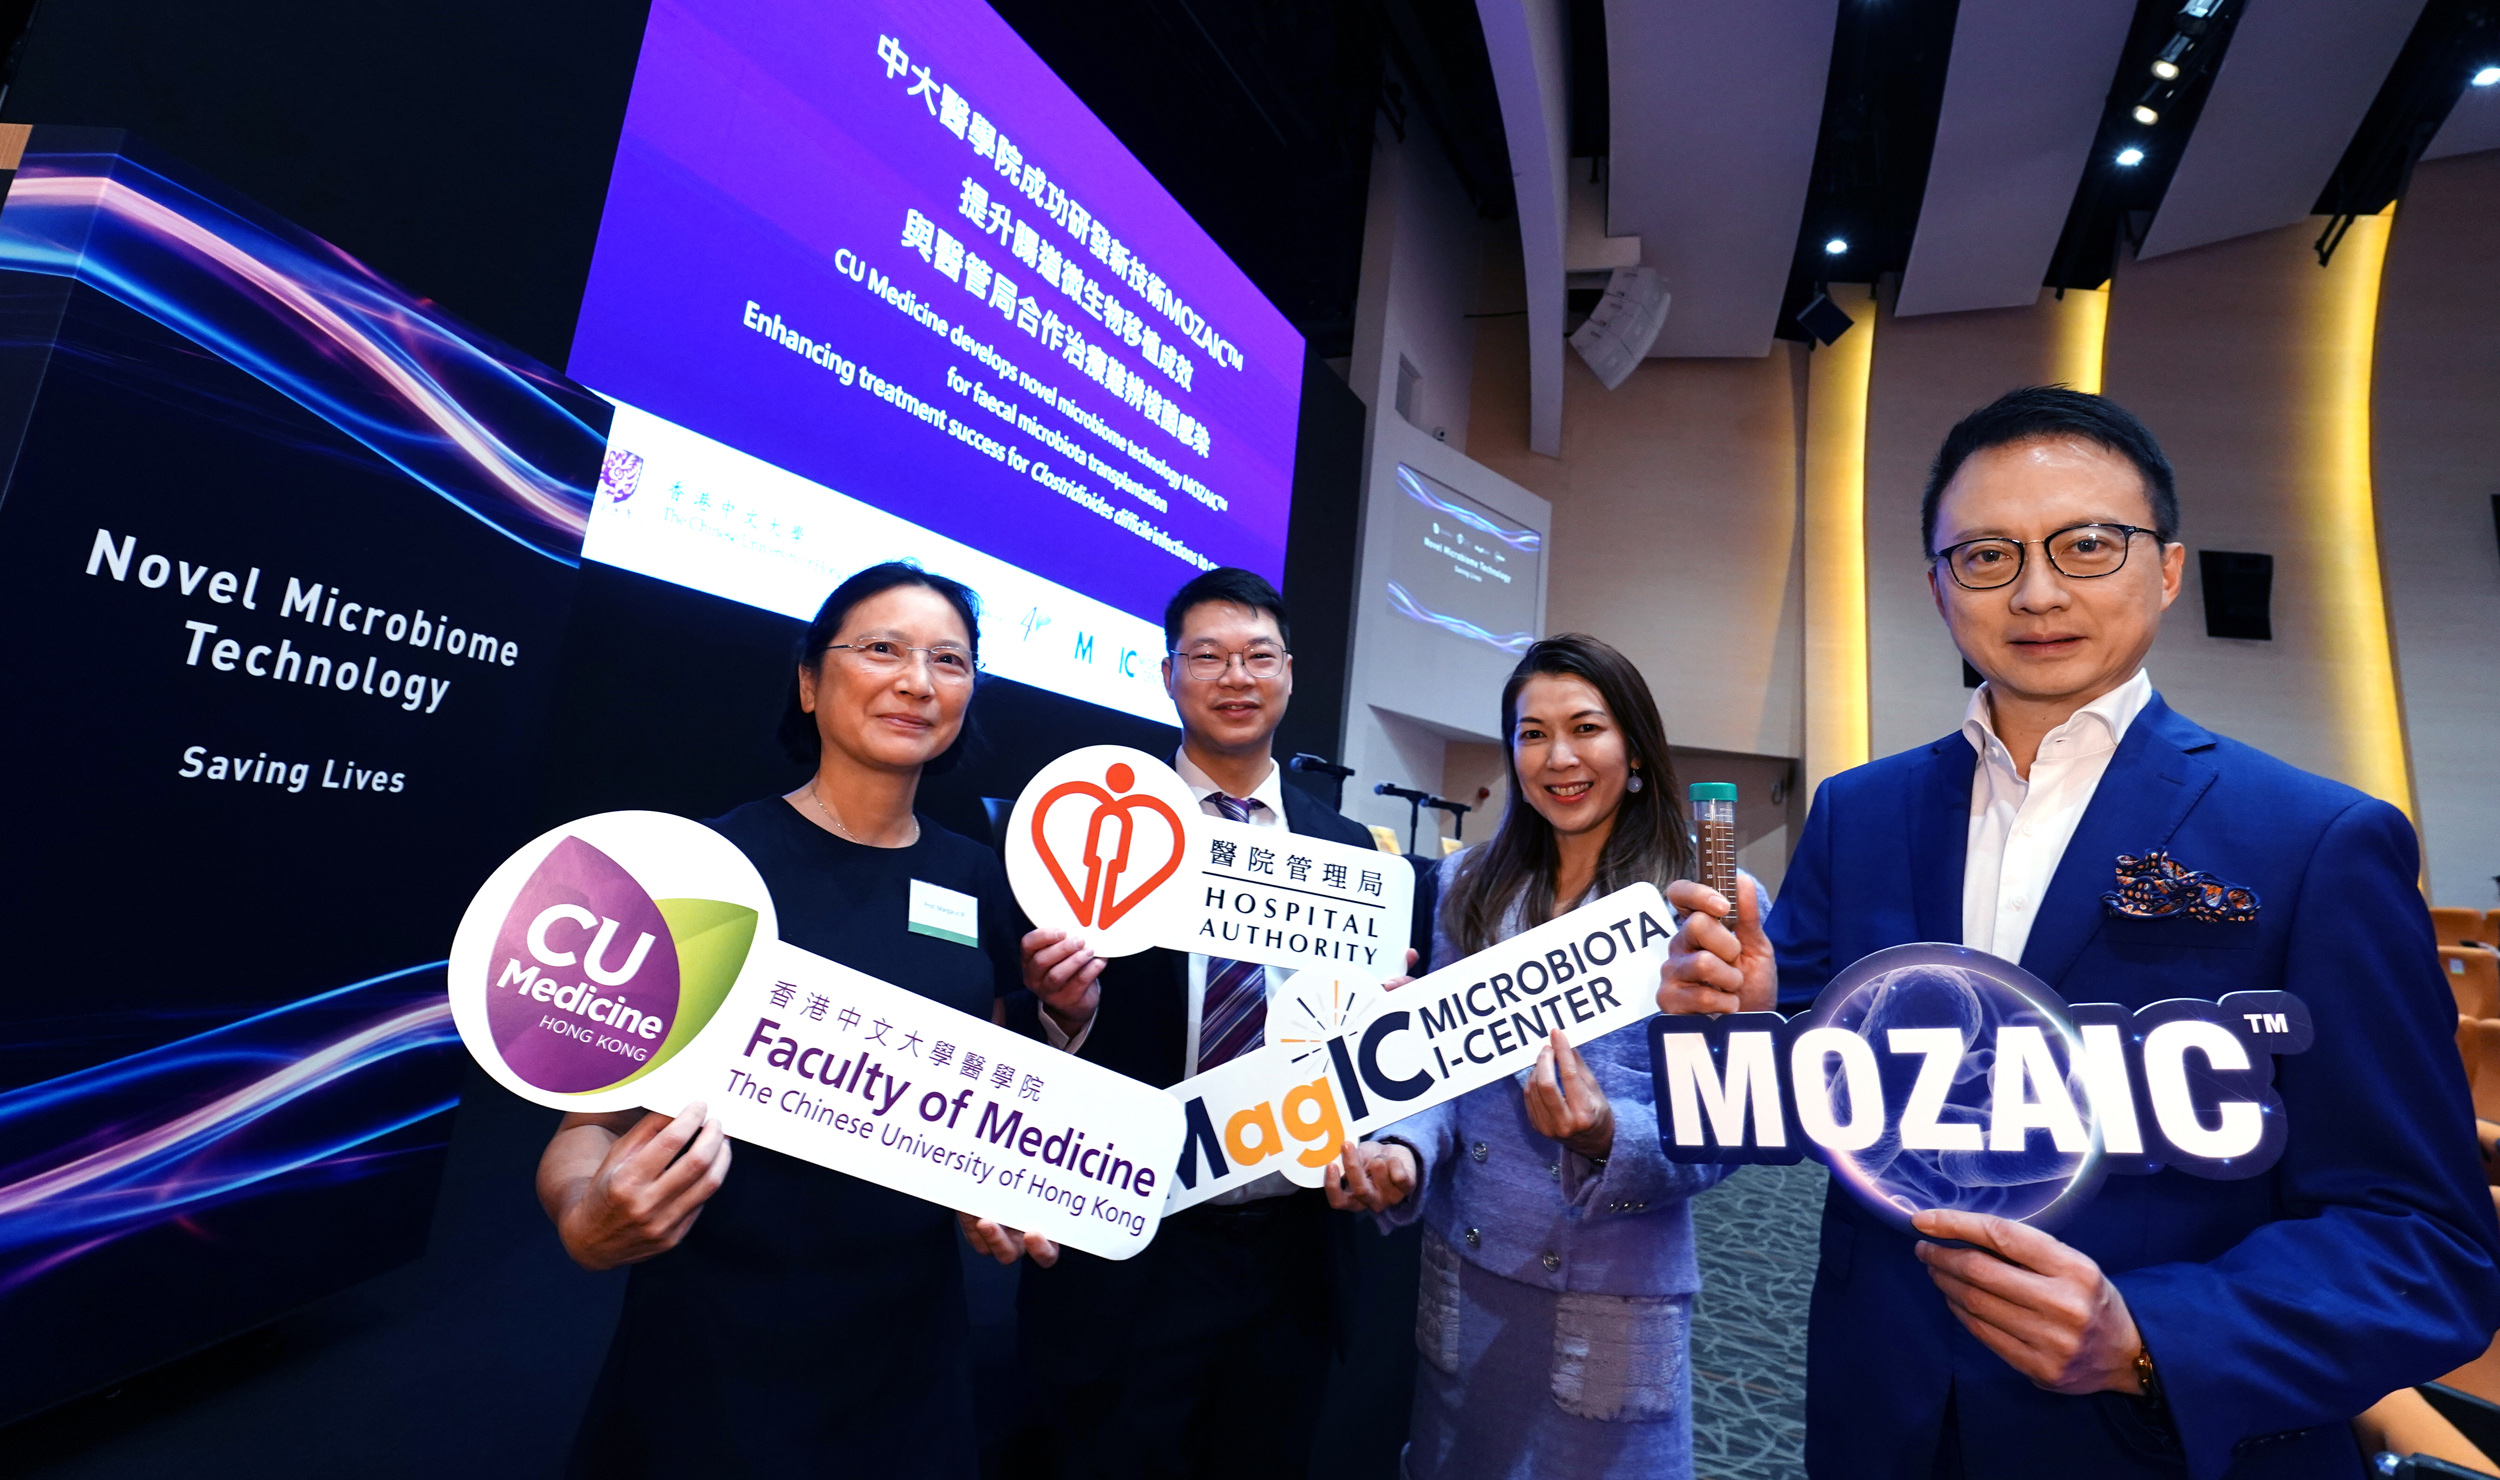 (From left) Professor Margaret Ip, Chairperson of the Department of Microbiology at CU Medicine; Dr Rashid Lui, the HA’s FMT Service Coordinator; Professor Siew Ng, Director of MagIC; and Professor Francis Chan, Dean of CU Medicine.